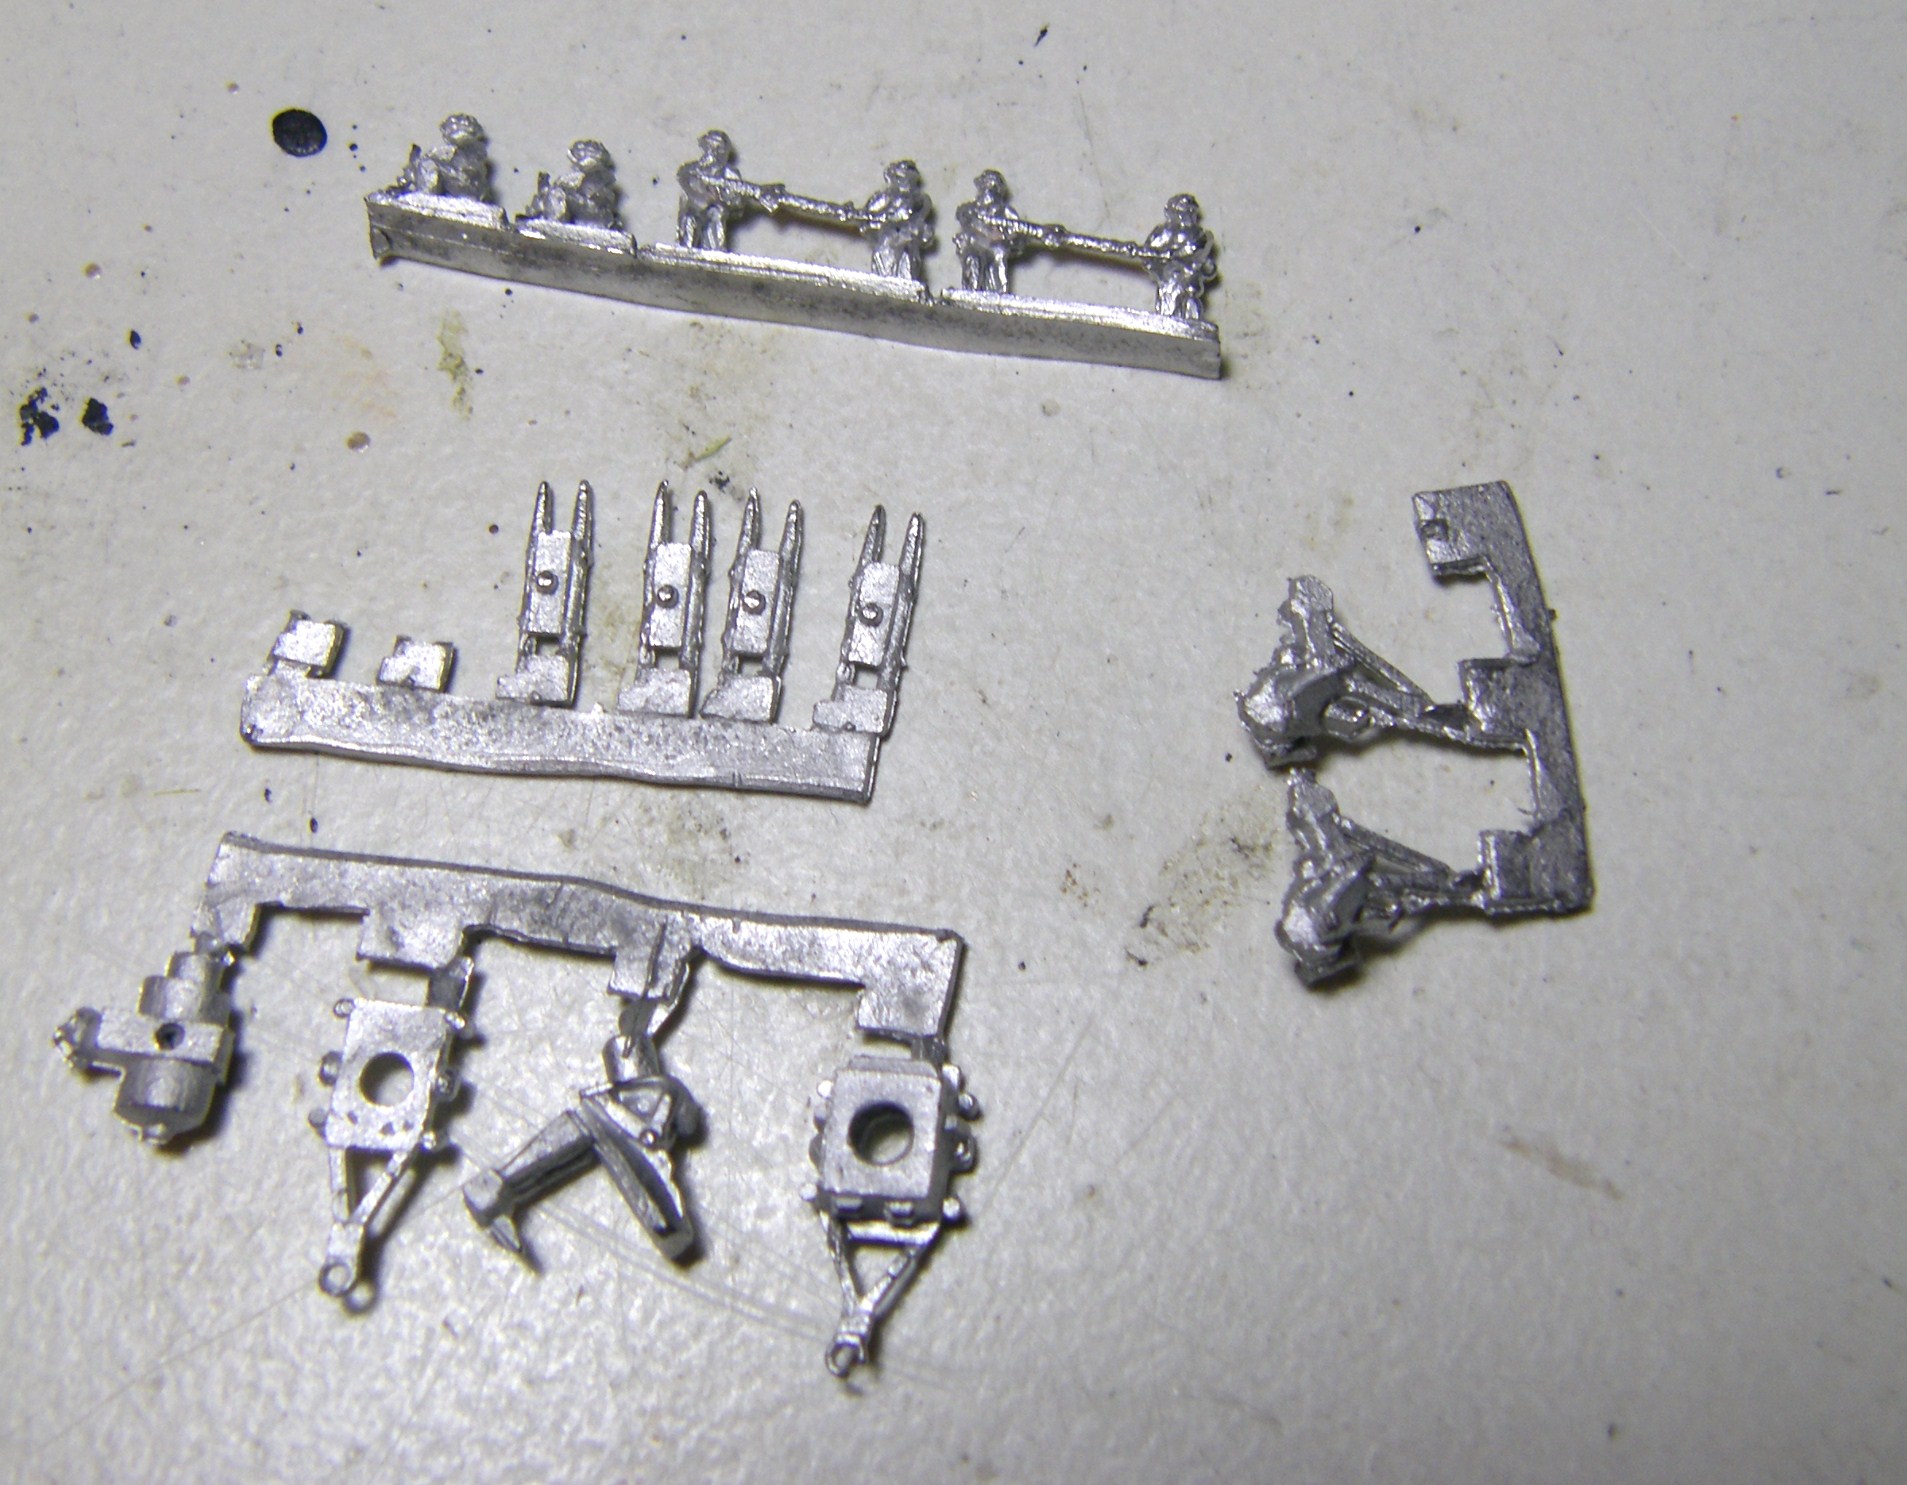 6mm Heroics and Ros Rapier assembly for Moderns, (CWC)